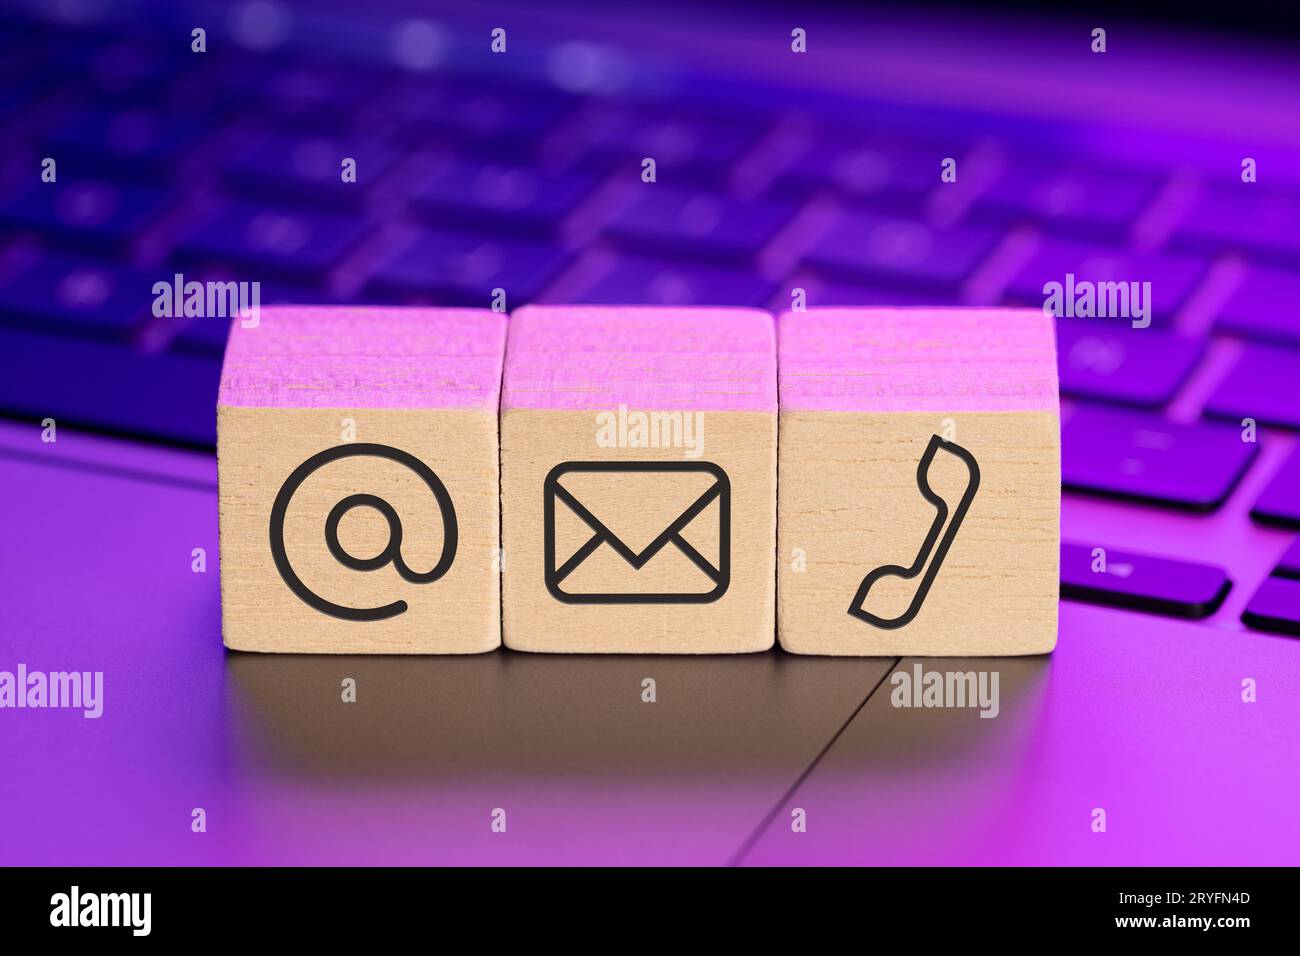 Contact us icons on wooden blocks on laptop with colorful lights Stock Photo